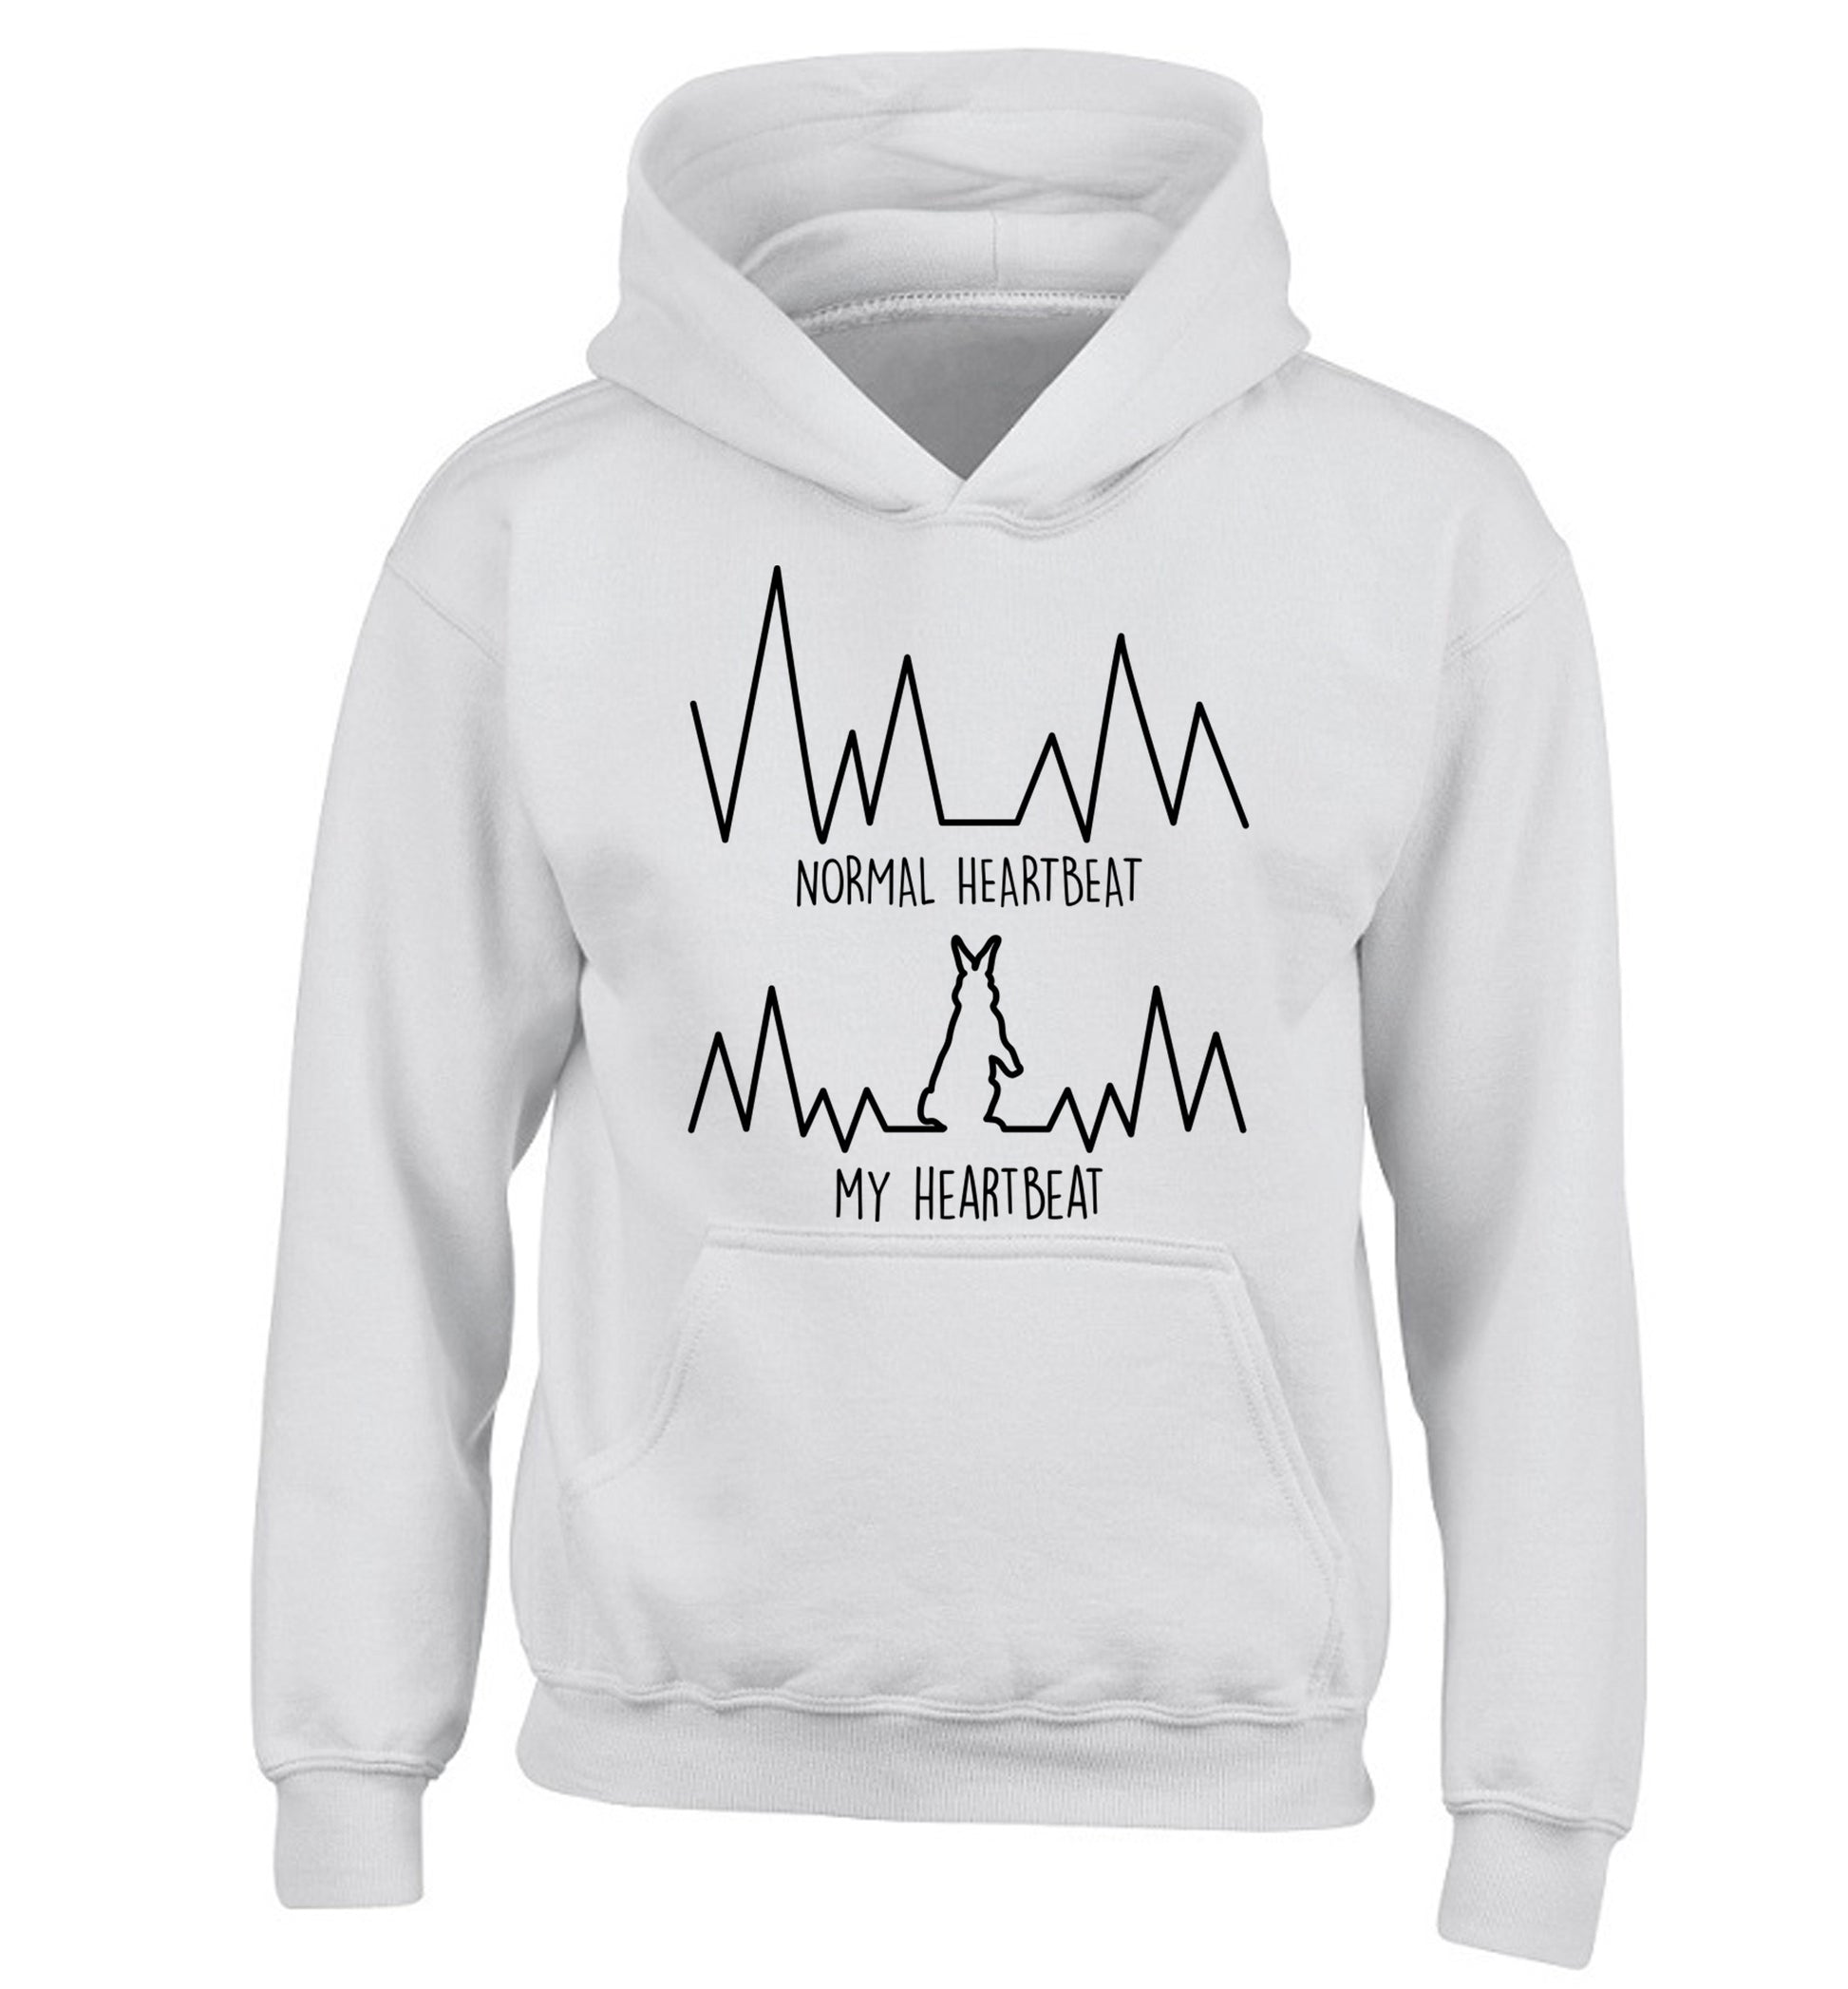 Normal heartbeat, my heartbeat rabbit lover children's white hoodie 12-14 Years